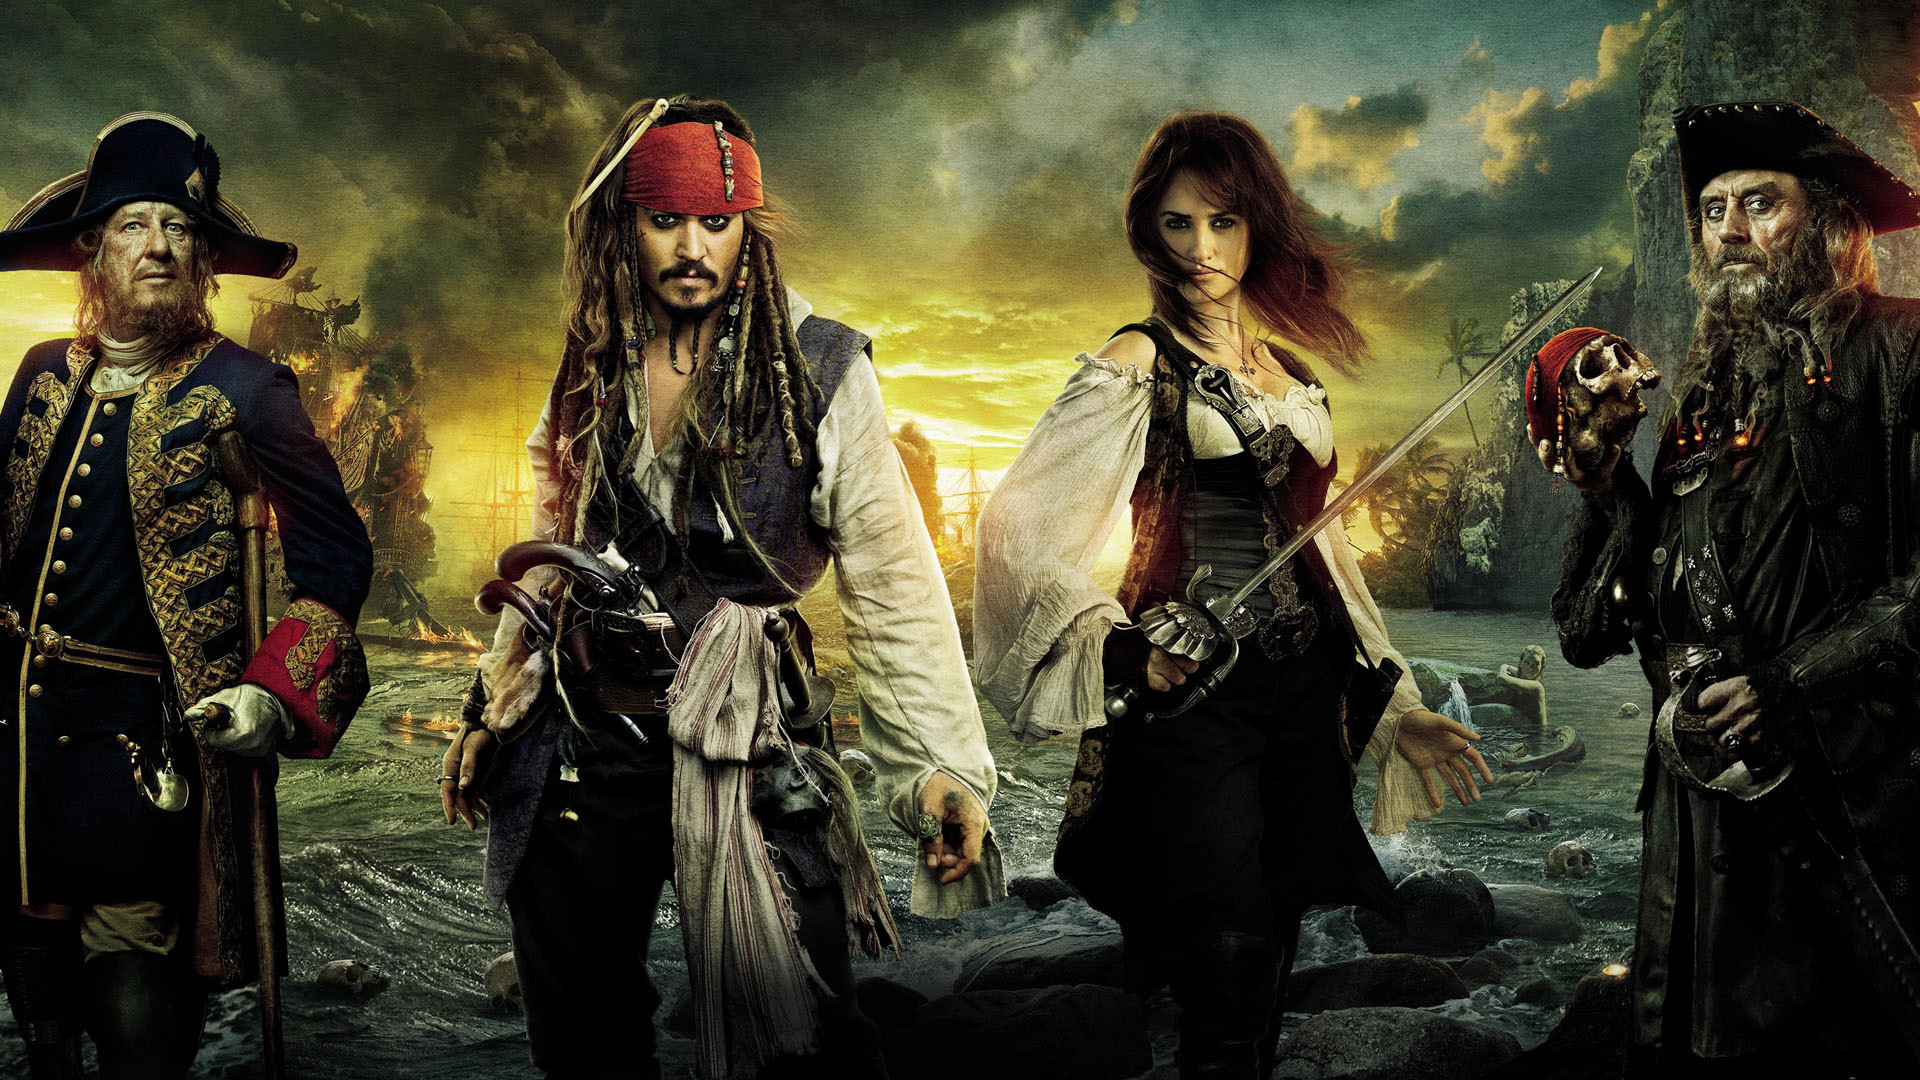 1920x1080 Pirates of the Caribbean on stranger tides. HD Wallpaper and background  photos of POTC 4 for fans of Pirates of the Caribbean: On Stranger Tides  images.